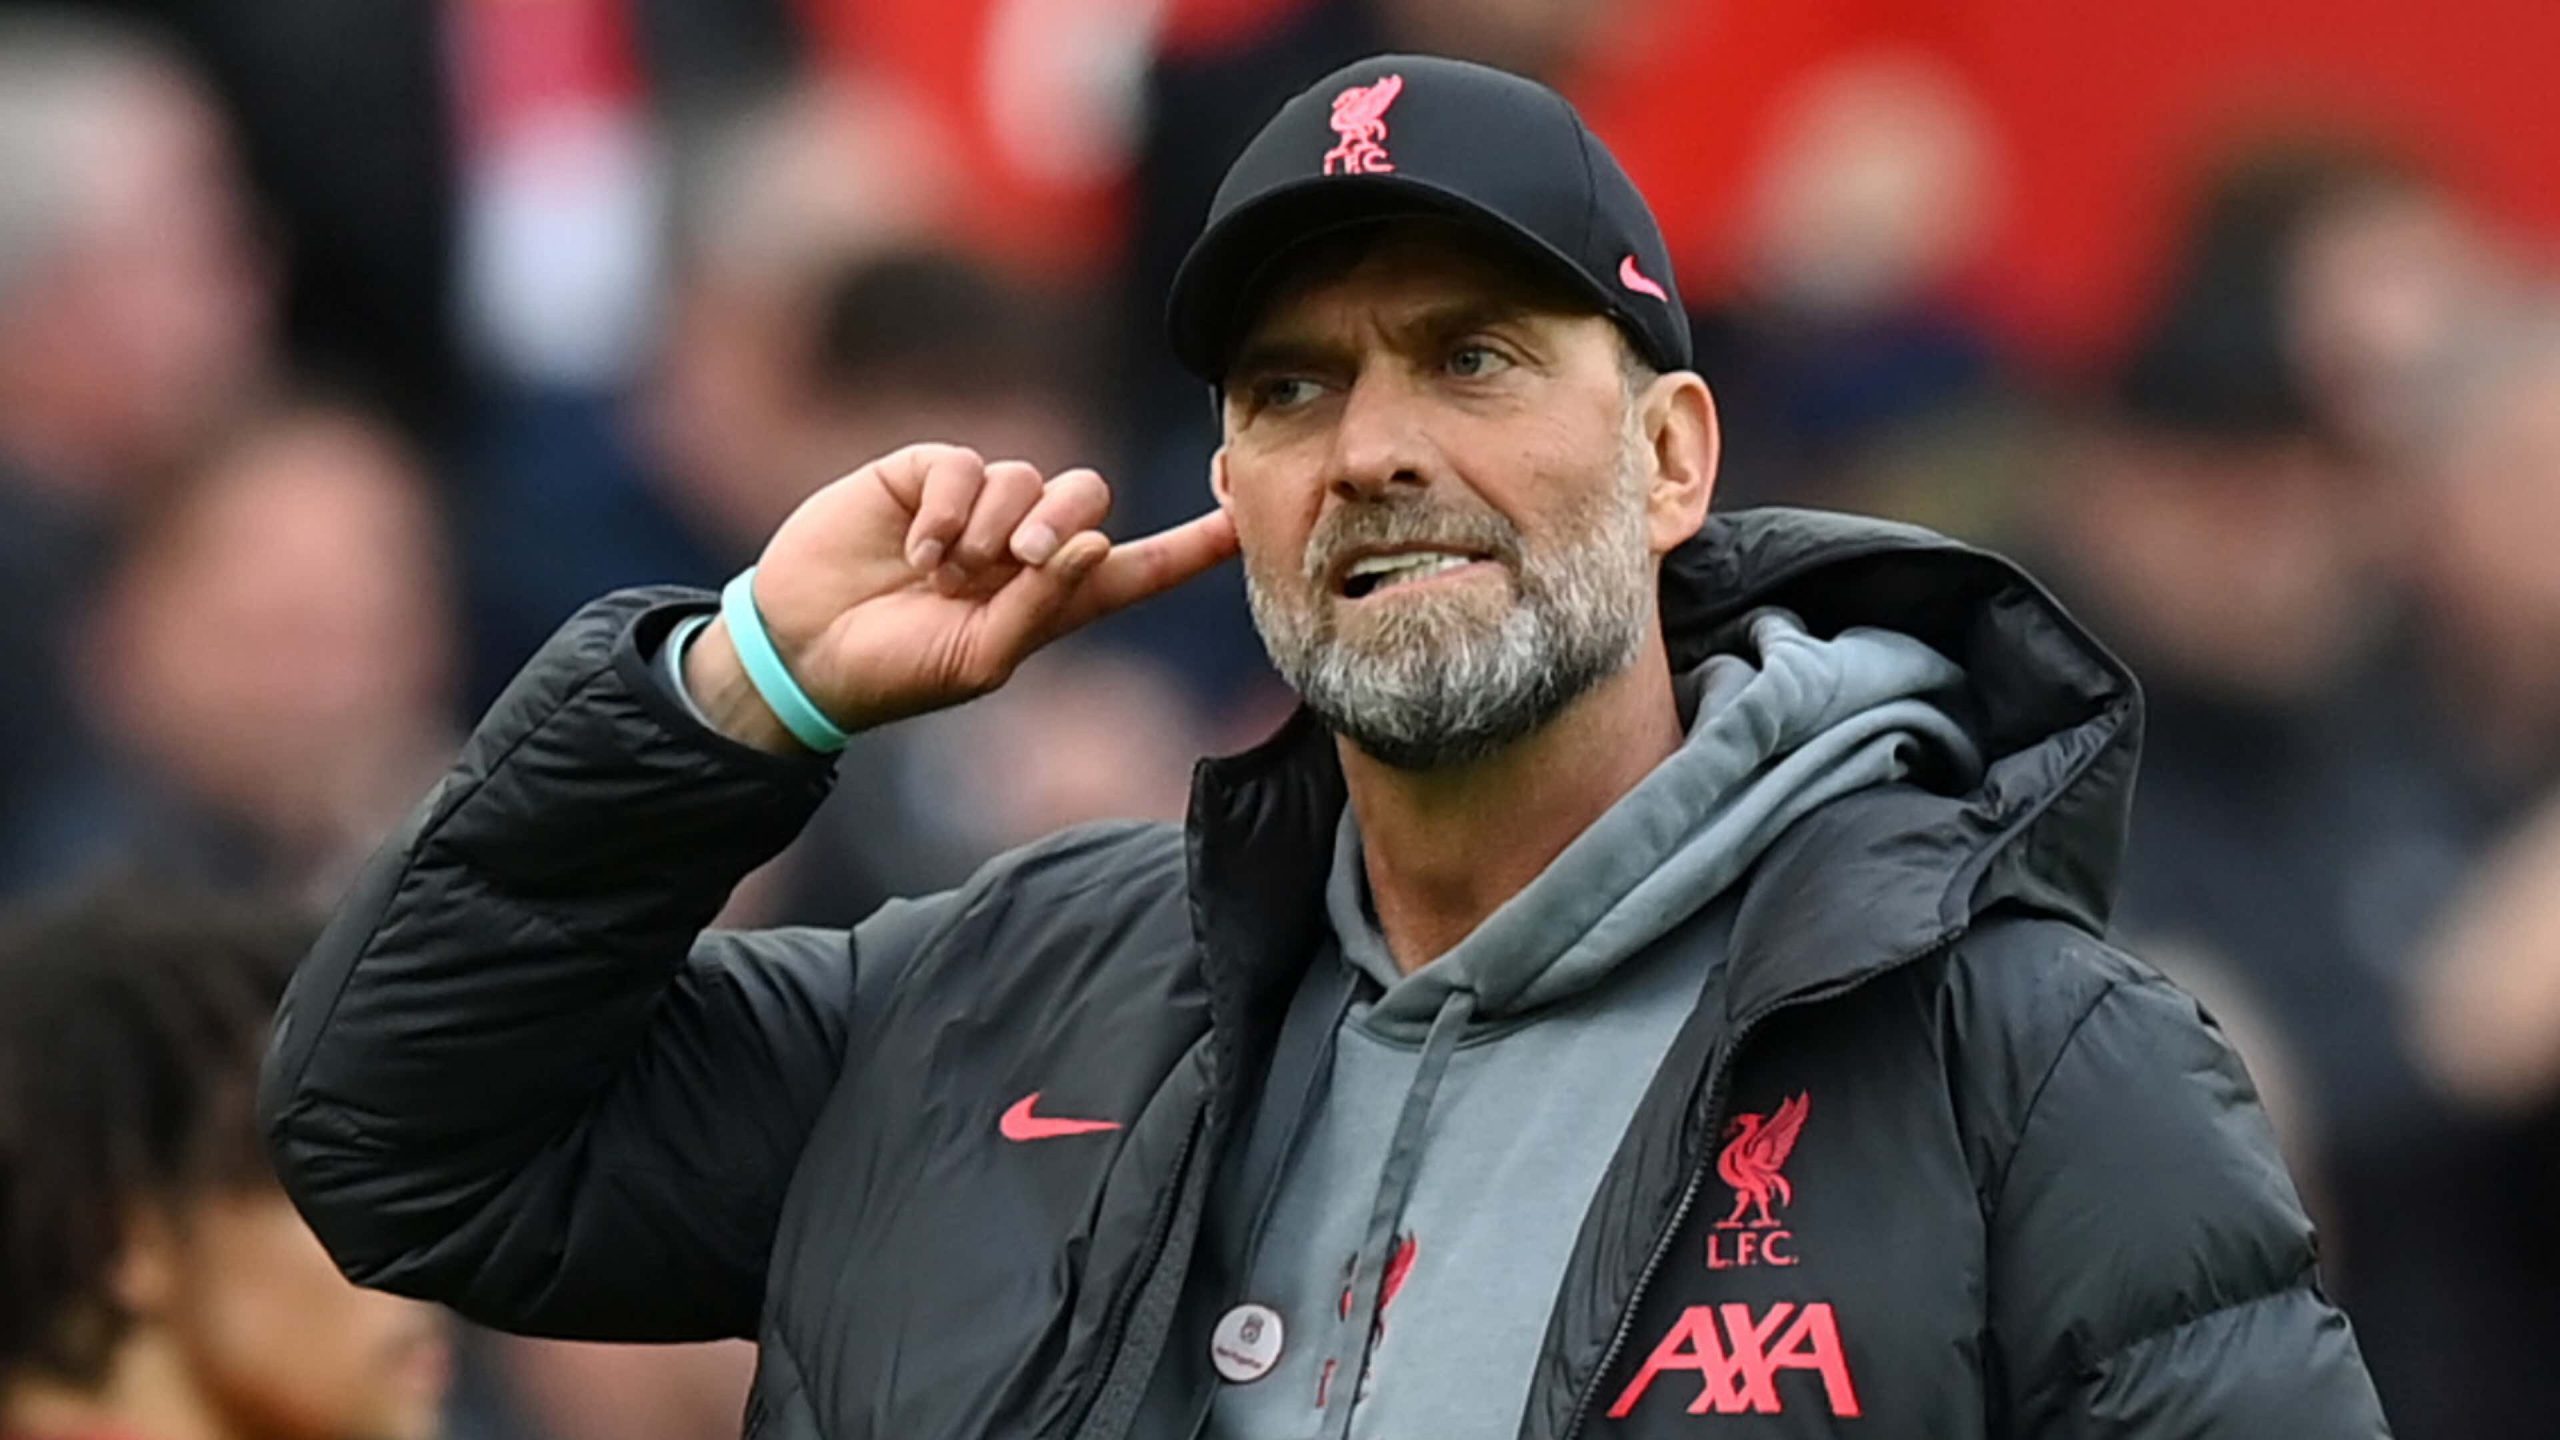 Jurgen Klopp Has the Potential to Guide Liverpool to More Trophies